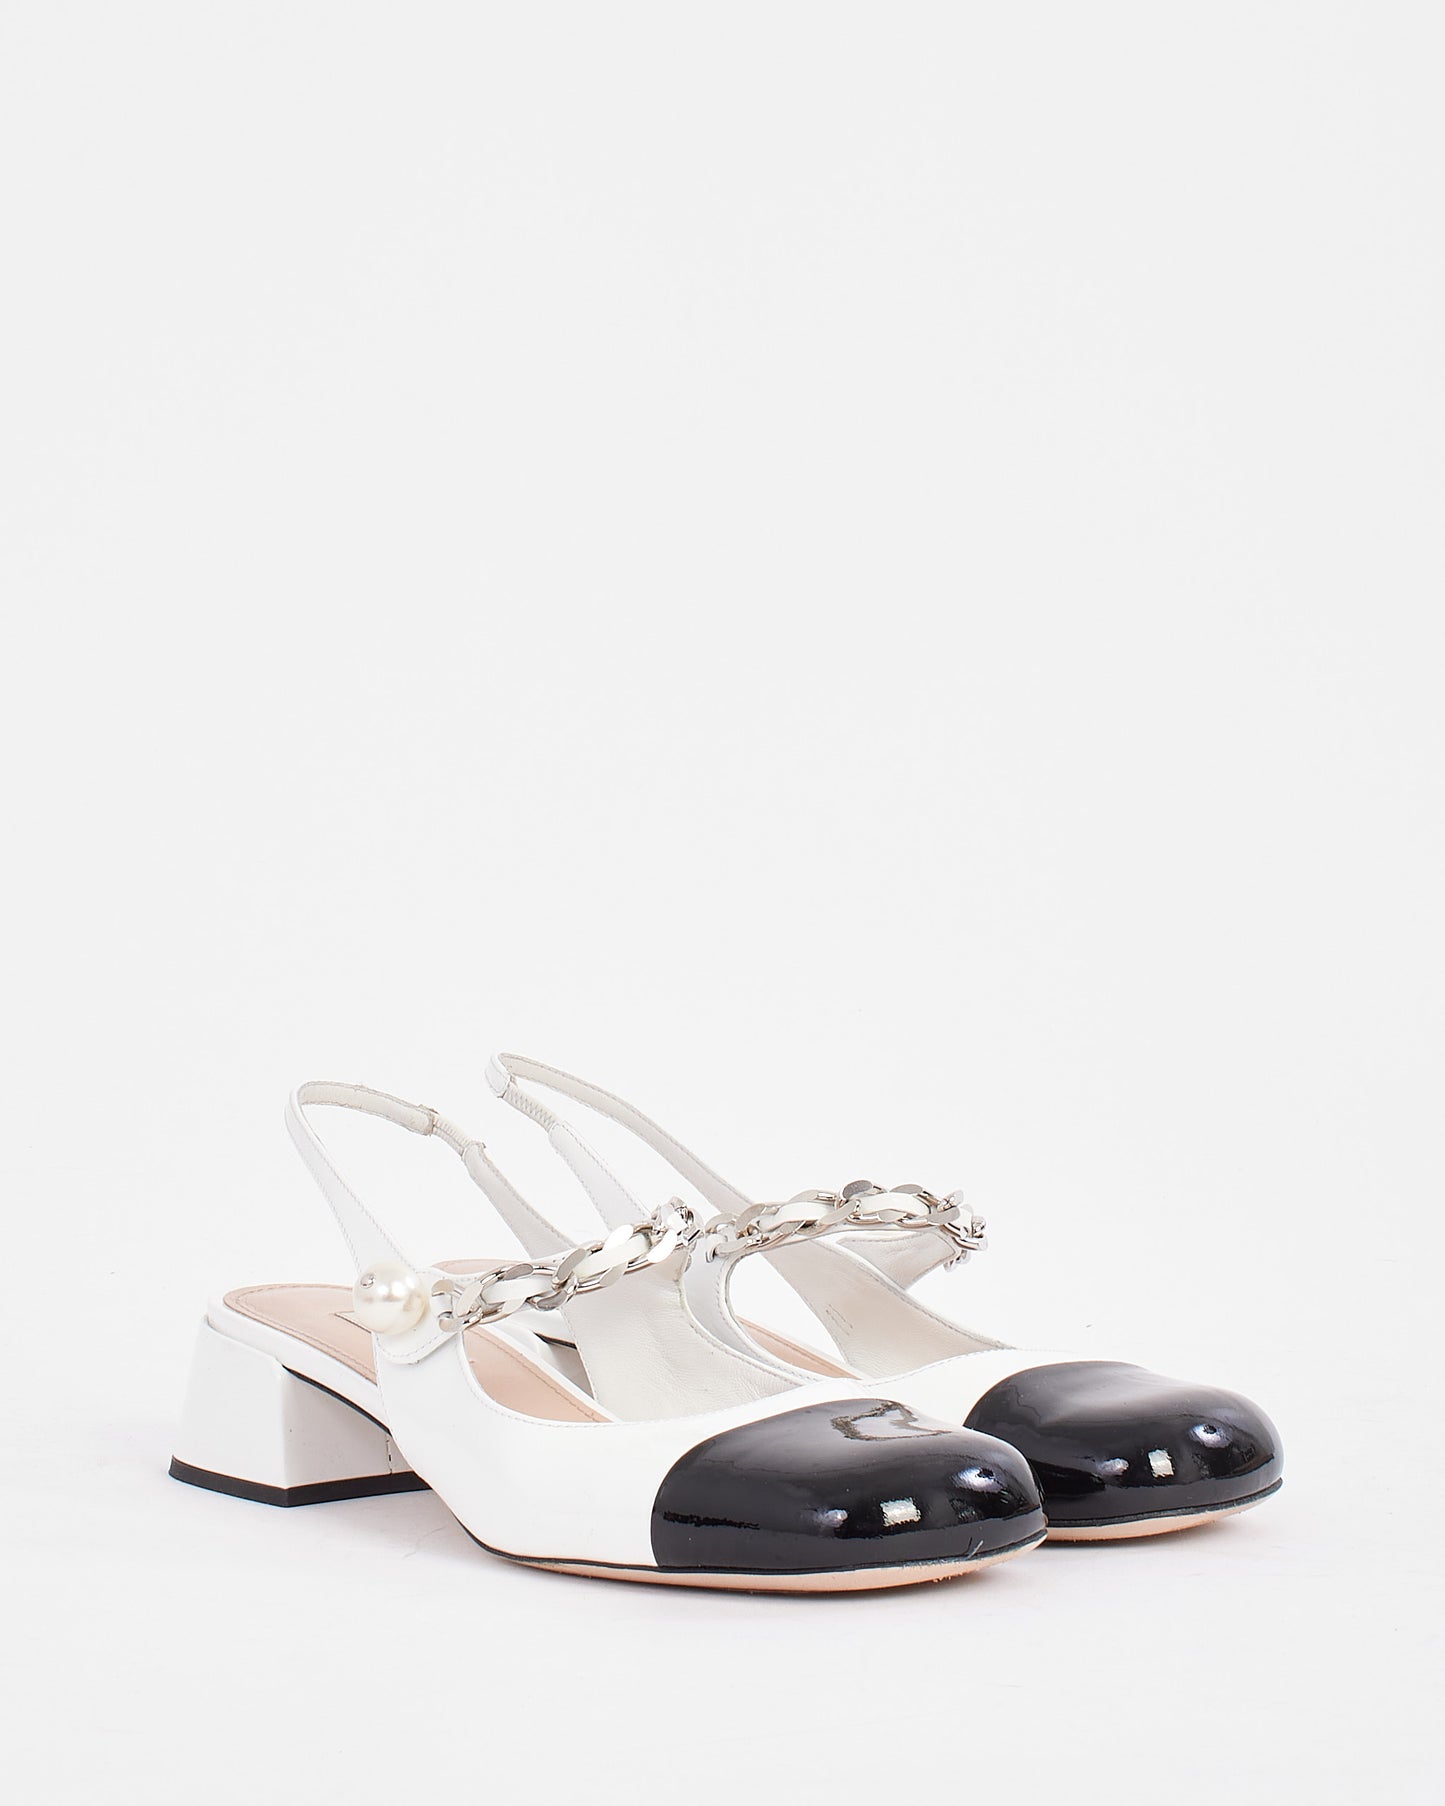 Miu Miu White Patent Leather Mary Jane Pumps With Pearl Strap - 37.5